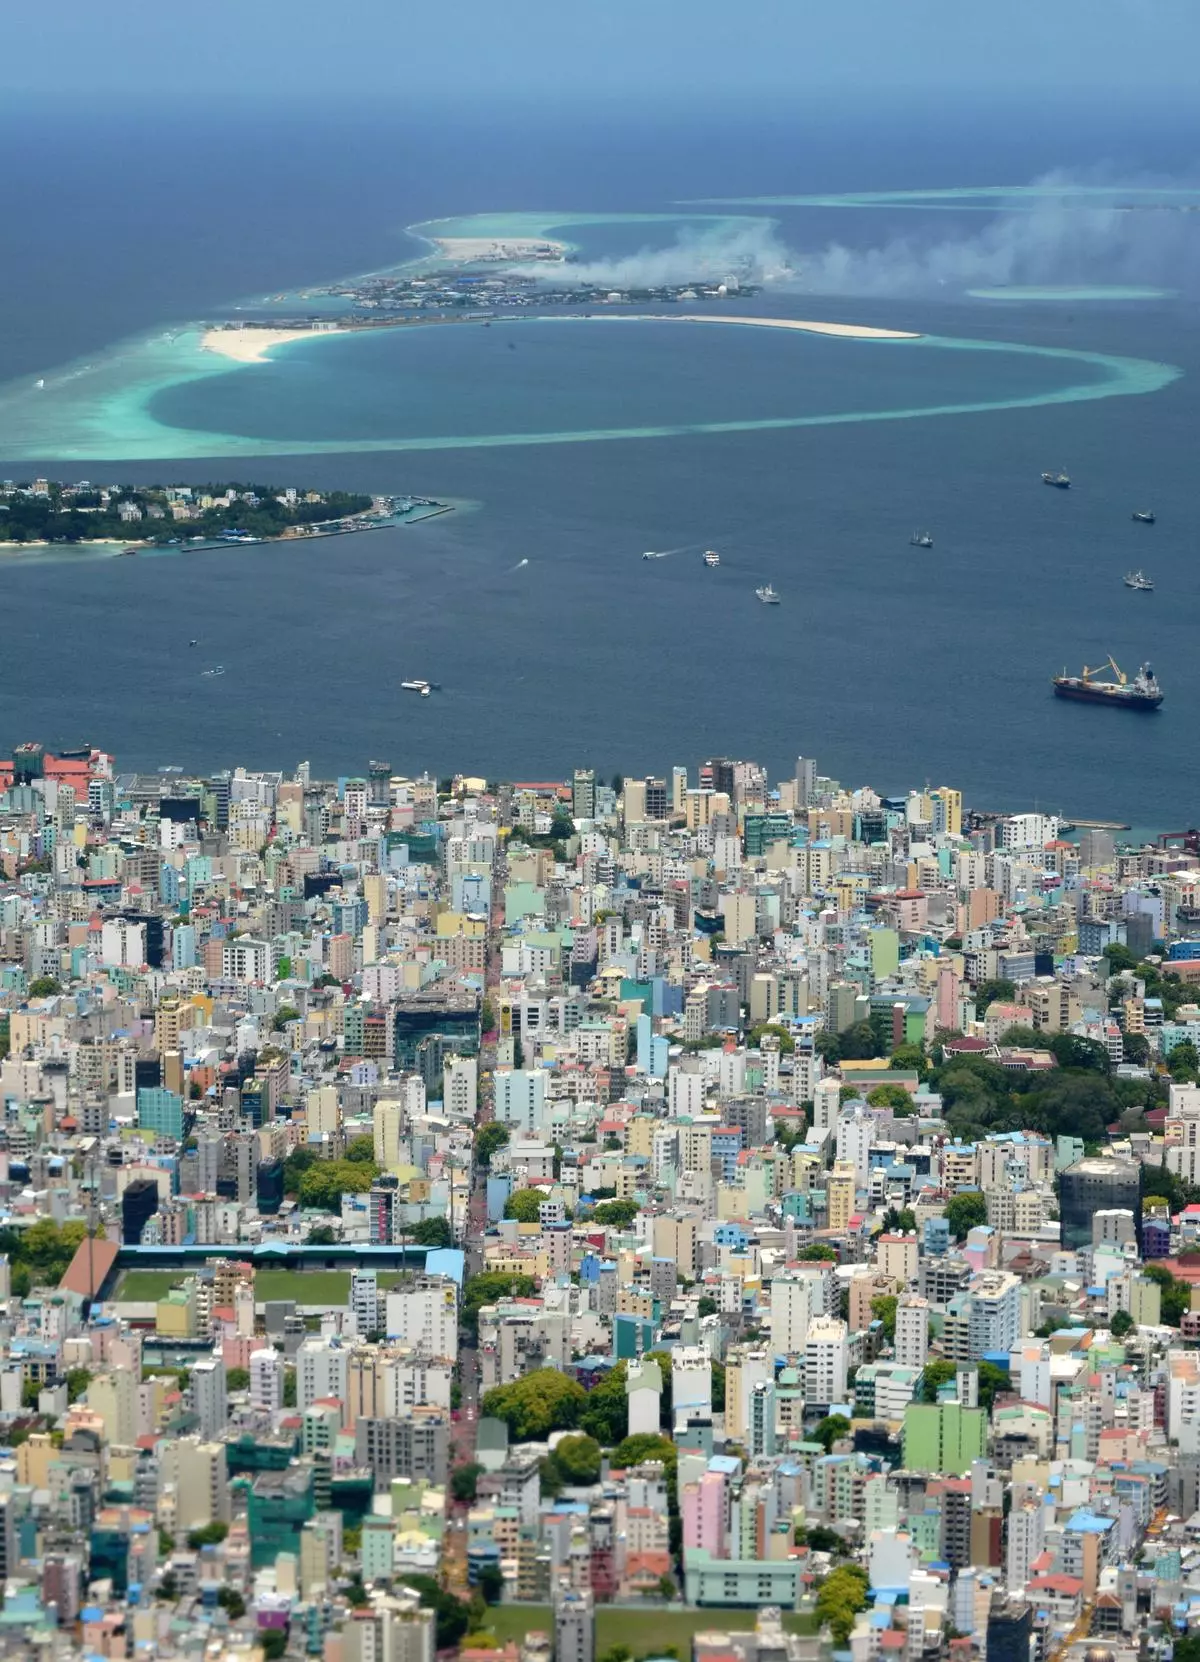 An aerial view of the island of Male and nearby Thilafushi Island (top). There was an unwritten understanding that the Male-Thilafushi project would be awarded to China after Yameen came back to power.